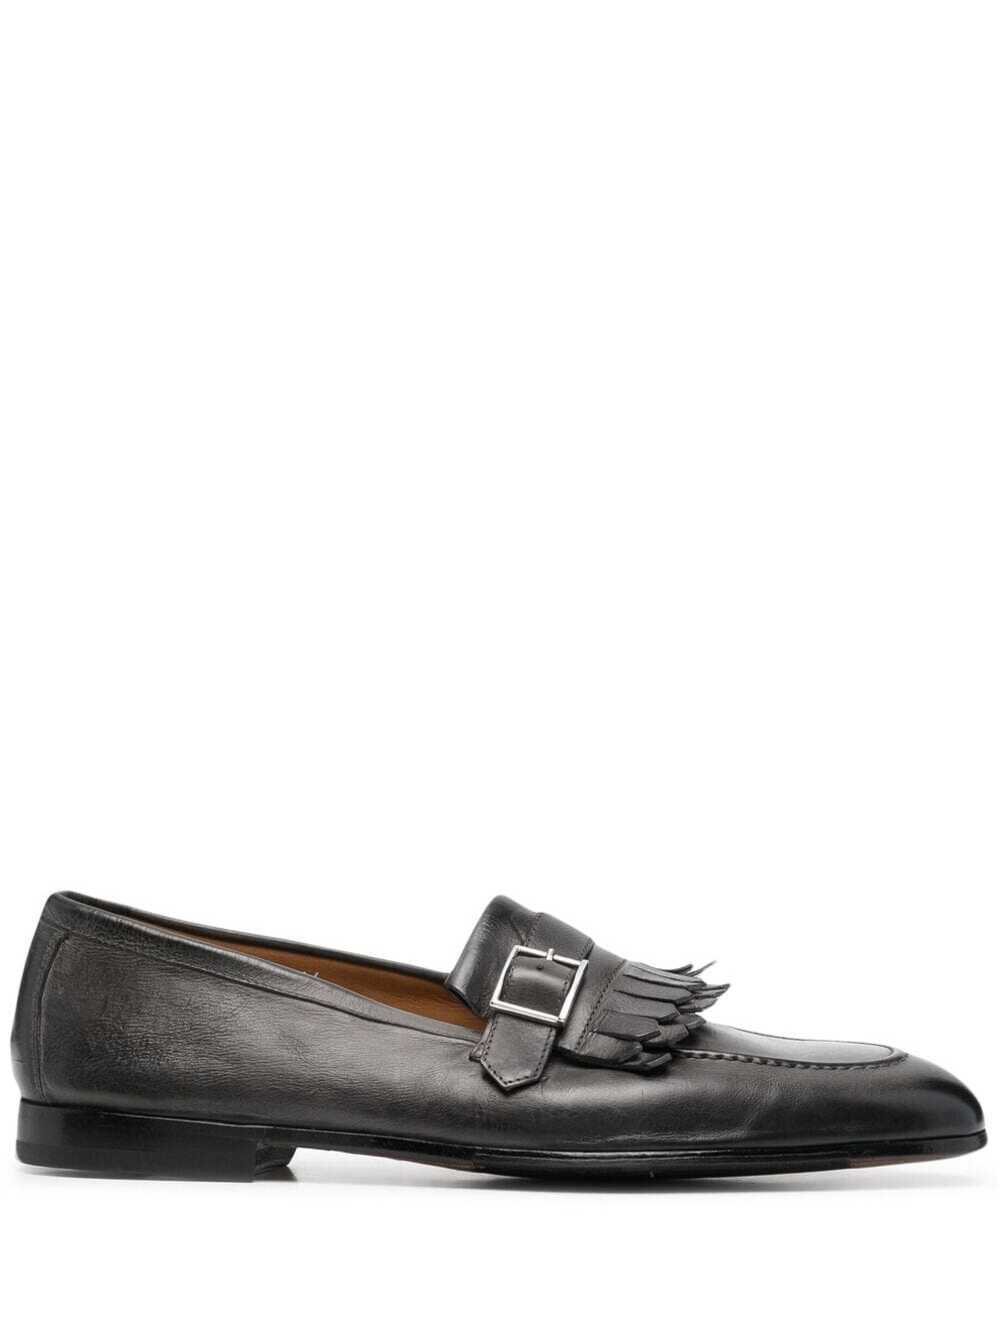 Doucal's Doucals Mens Shangai Black Leather Loafers